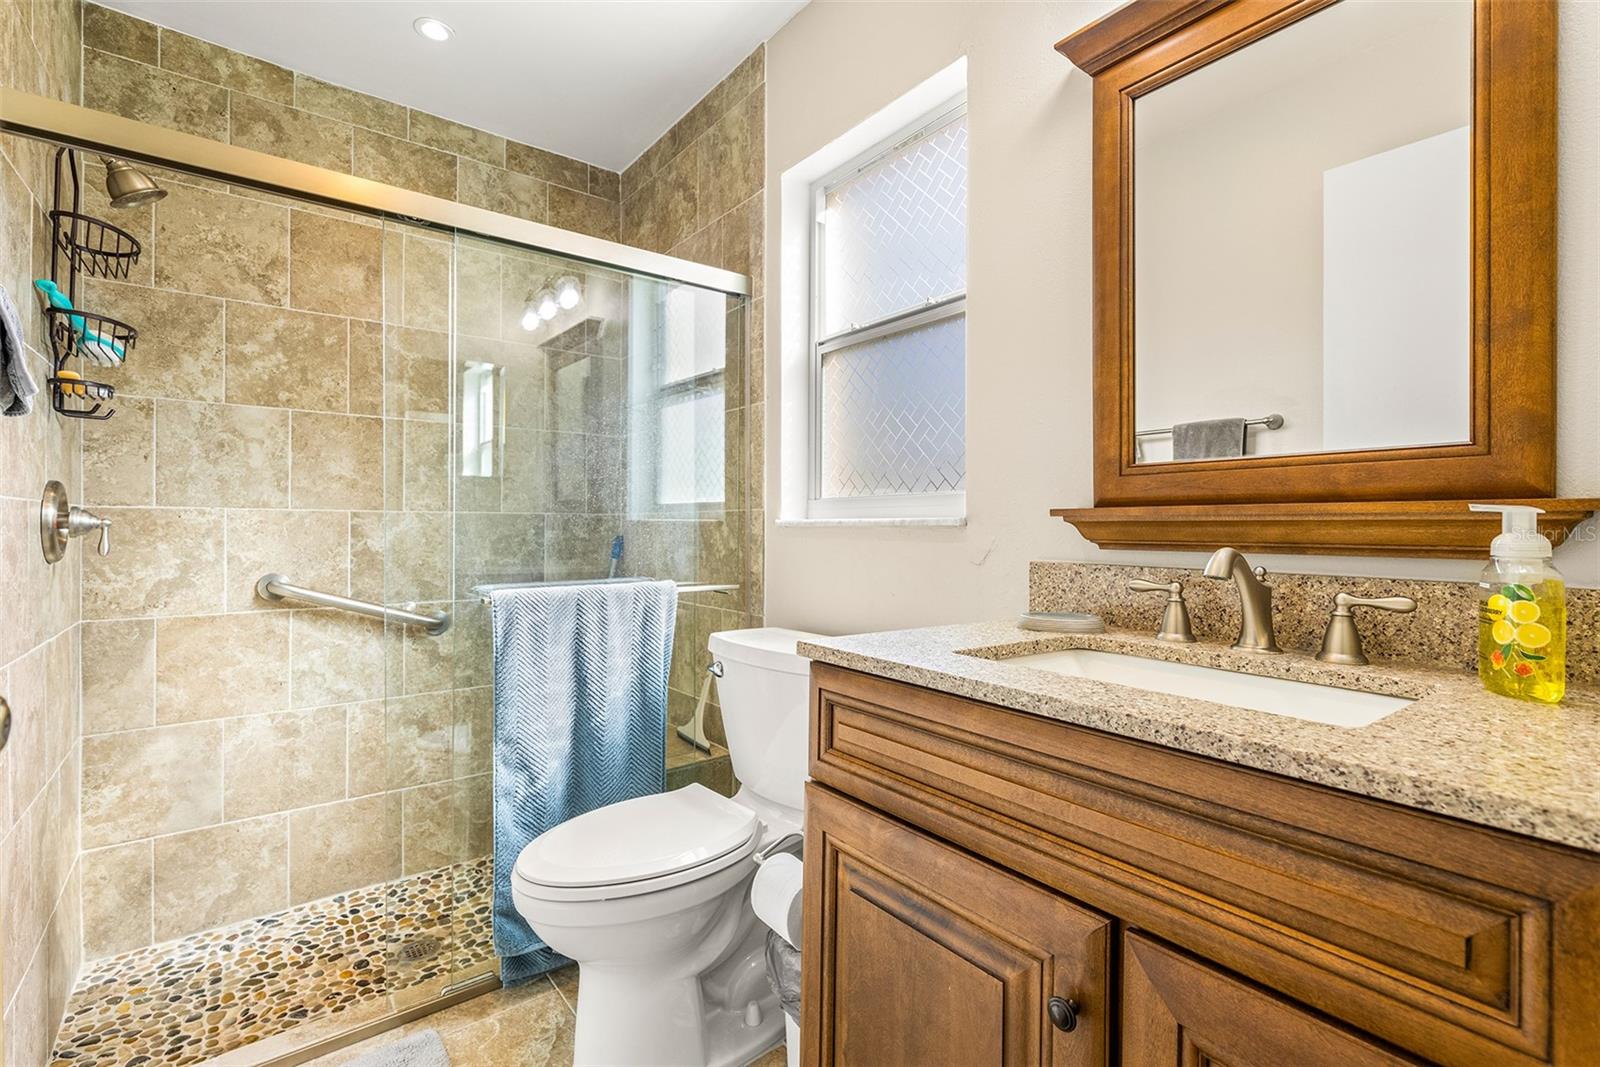 Completely renovated primary bathroom with large, custom tiled walk-in shower, new vanity, flooring & fixtures!